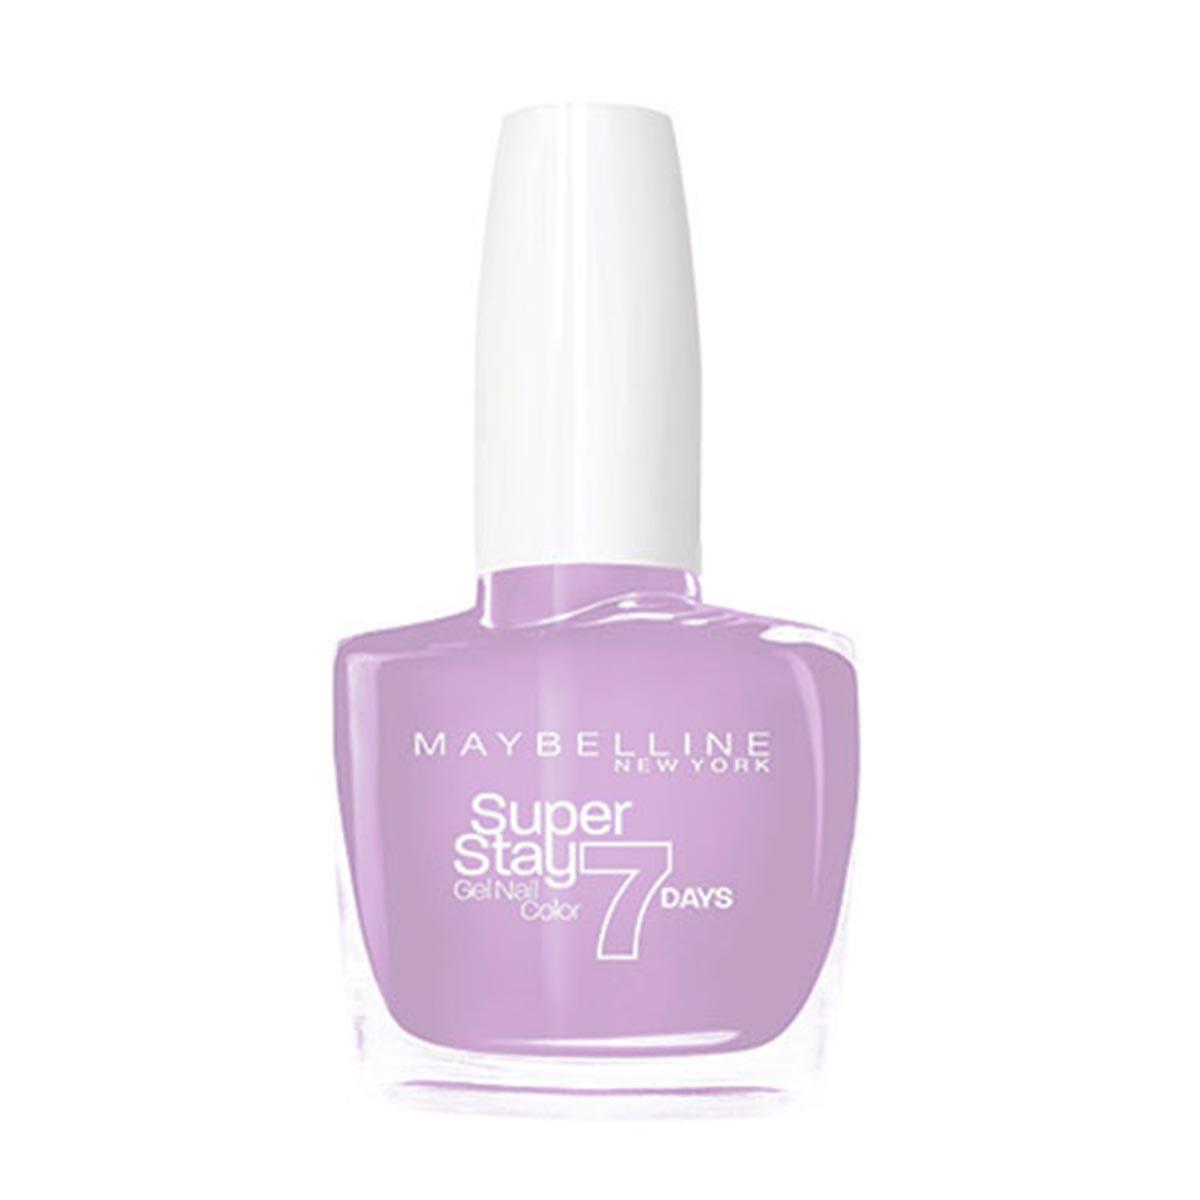 maybelline-superstay-gel-nail-color-7-days-210-eternal-lilac